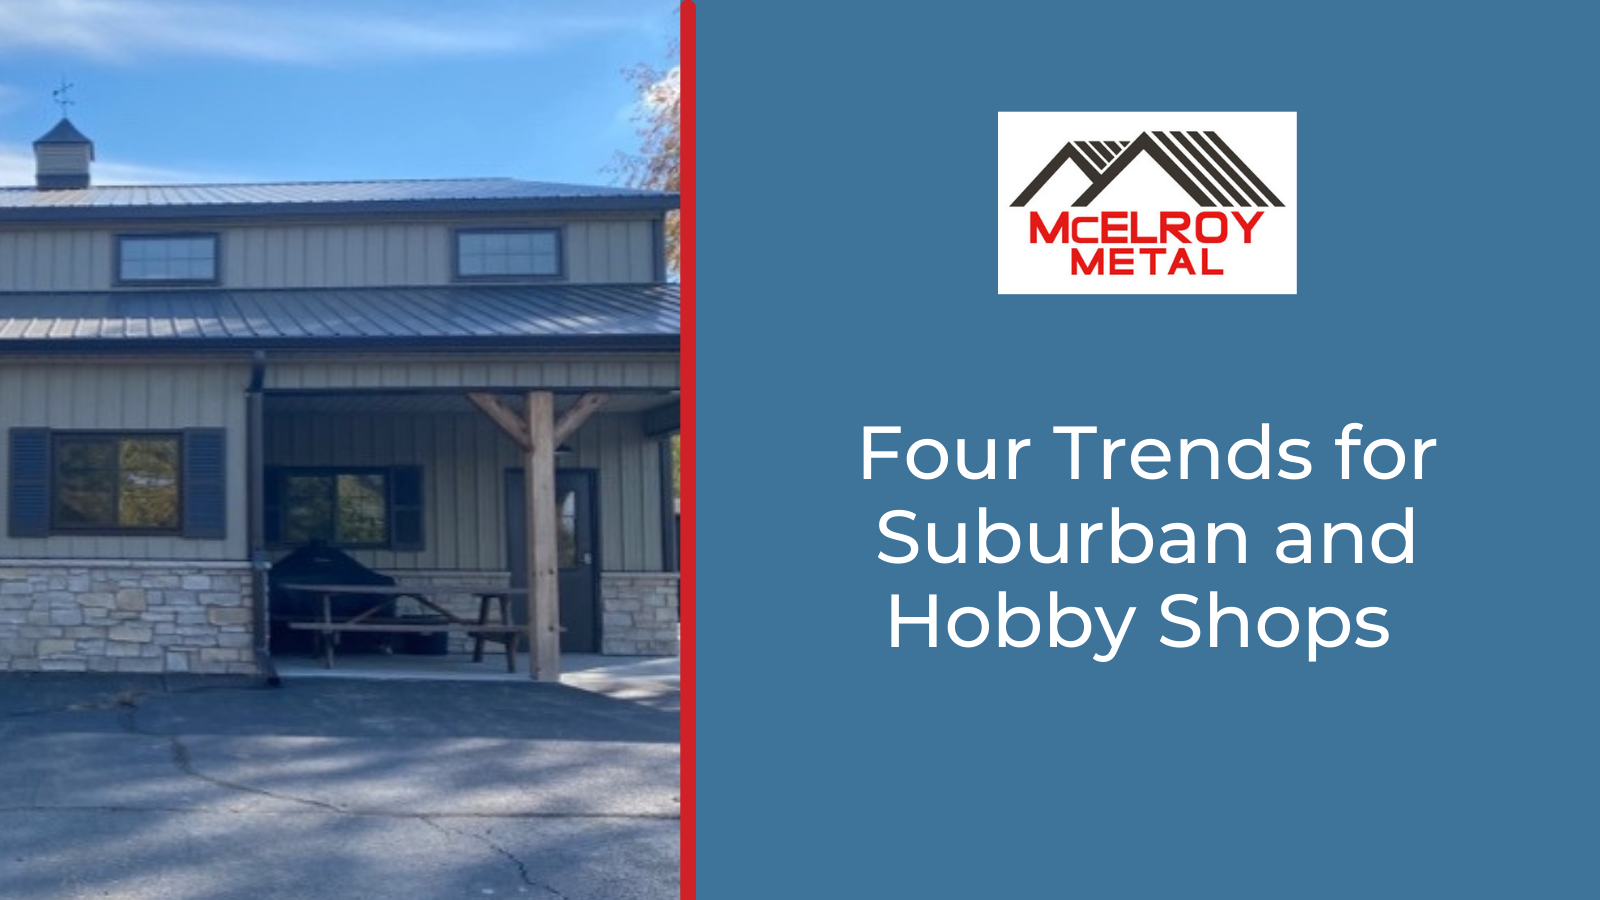 Four Trends for Suburban and Hobby Shops